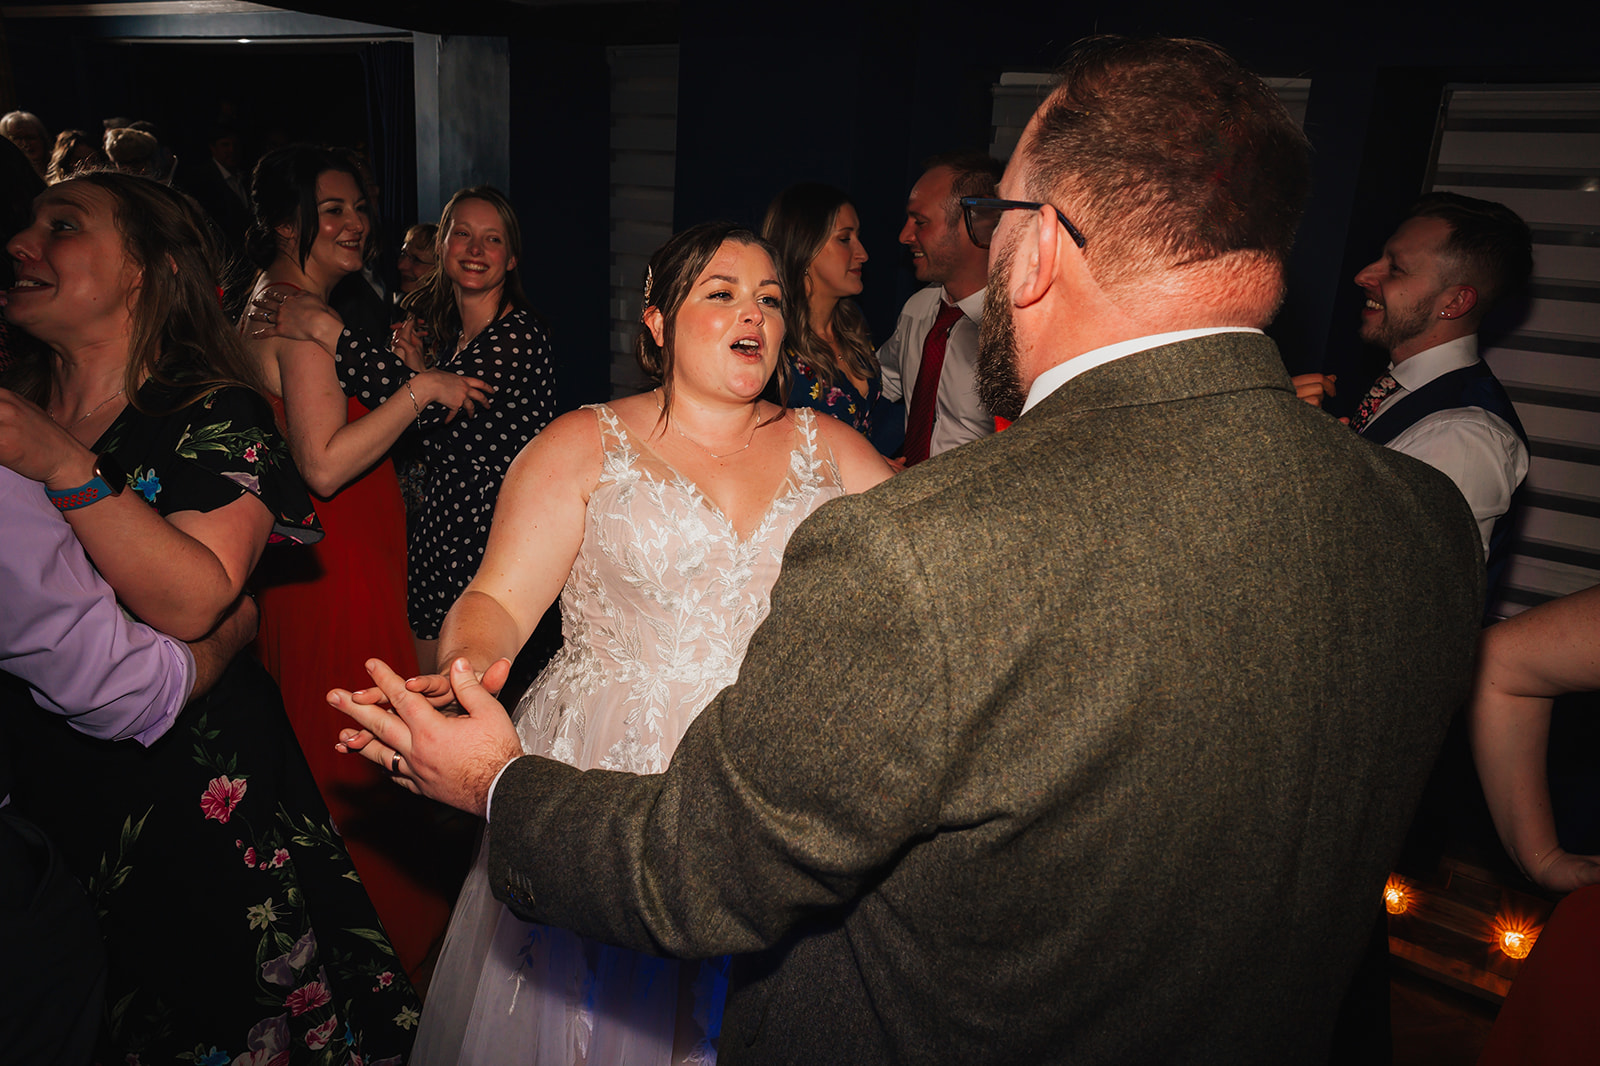 the bride and groom share their first dance